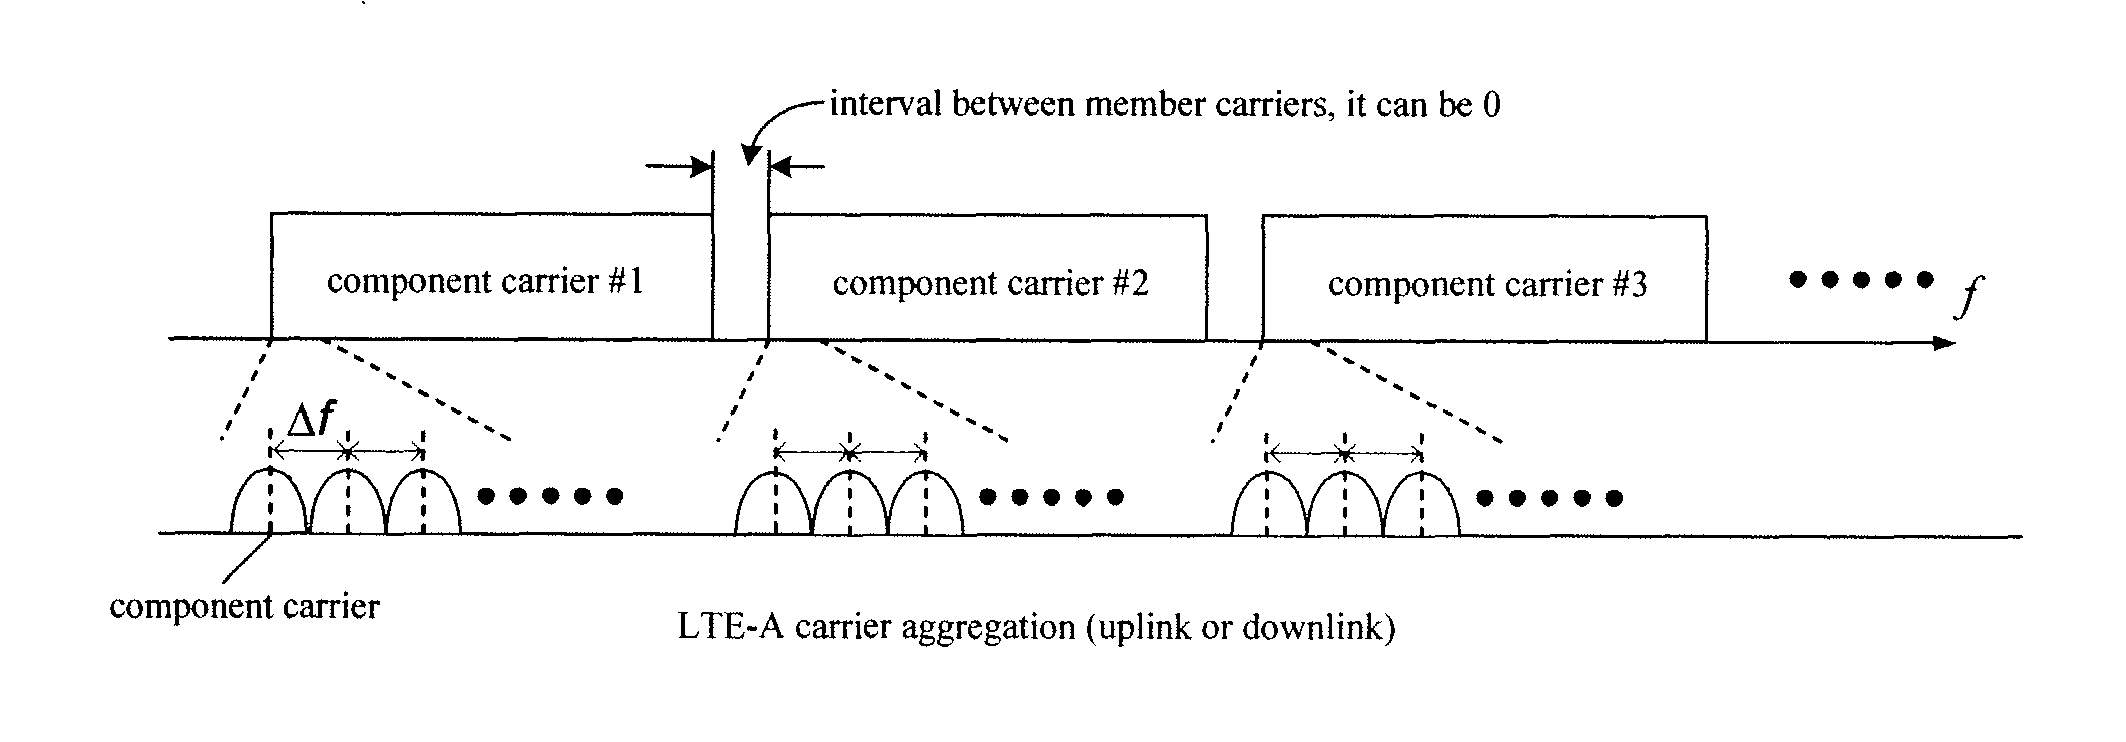 Method and System for Processing Measurement Event in Multi-Carrier System